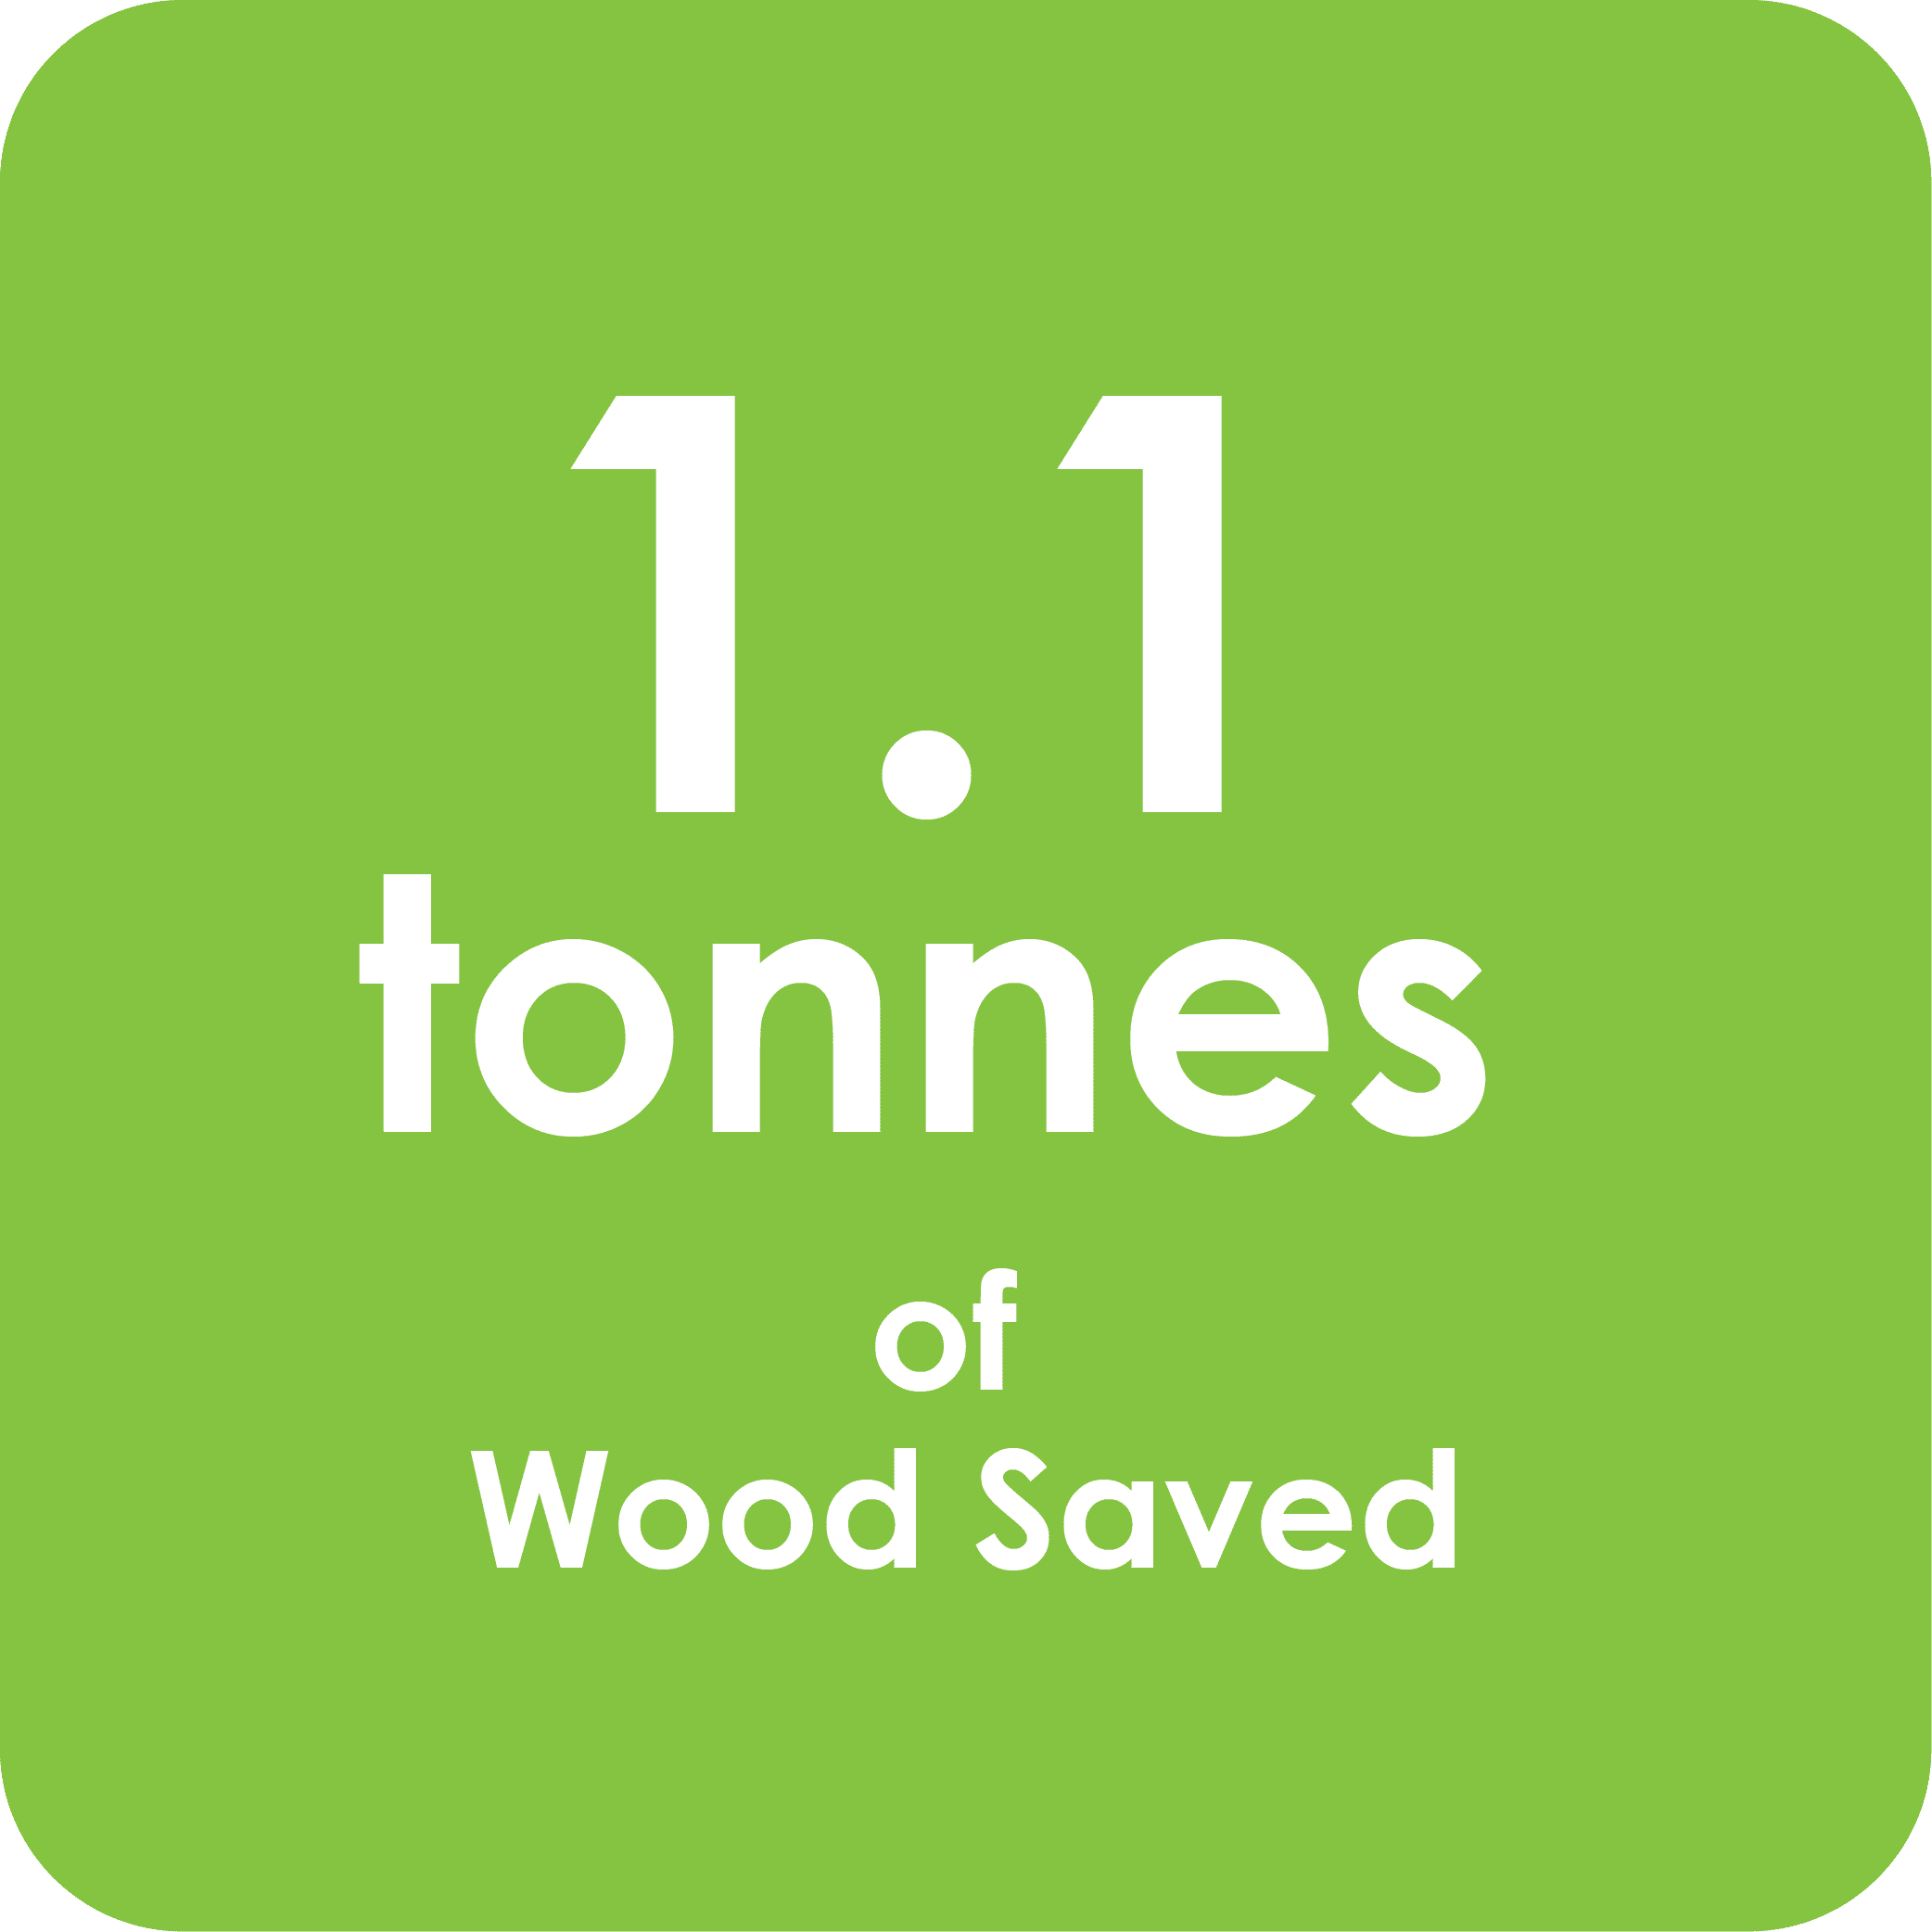 1.1 tonnes of Wood Saved